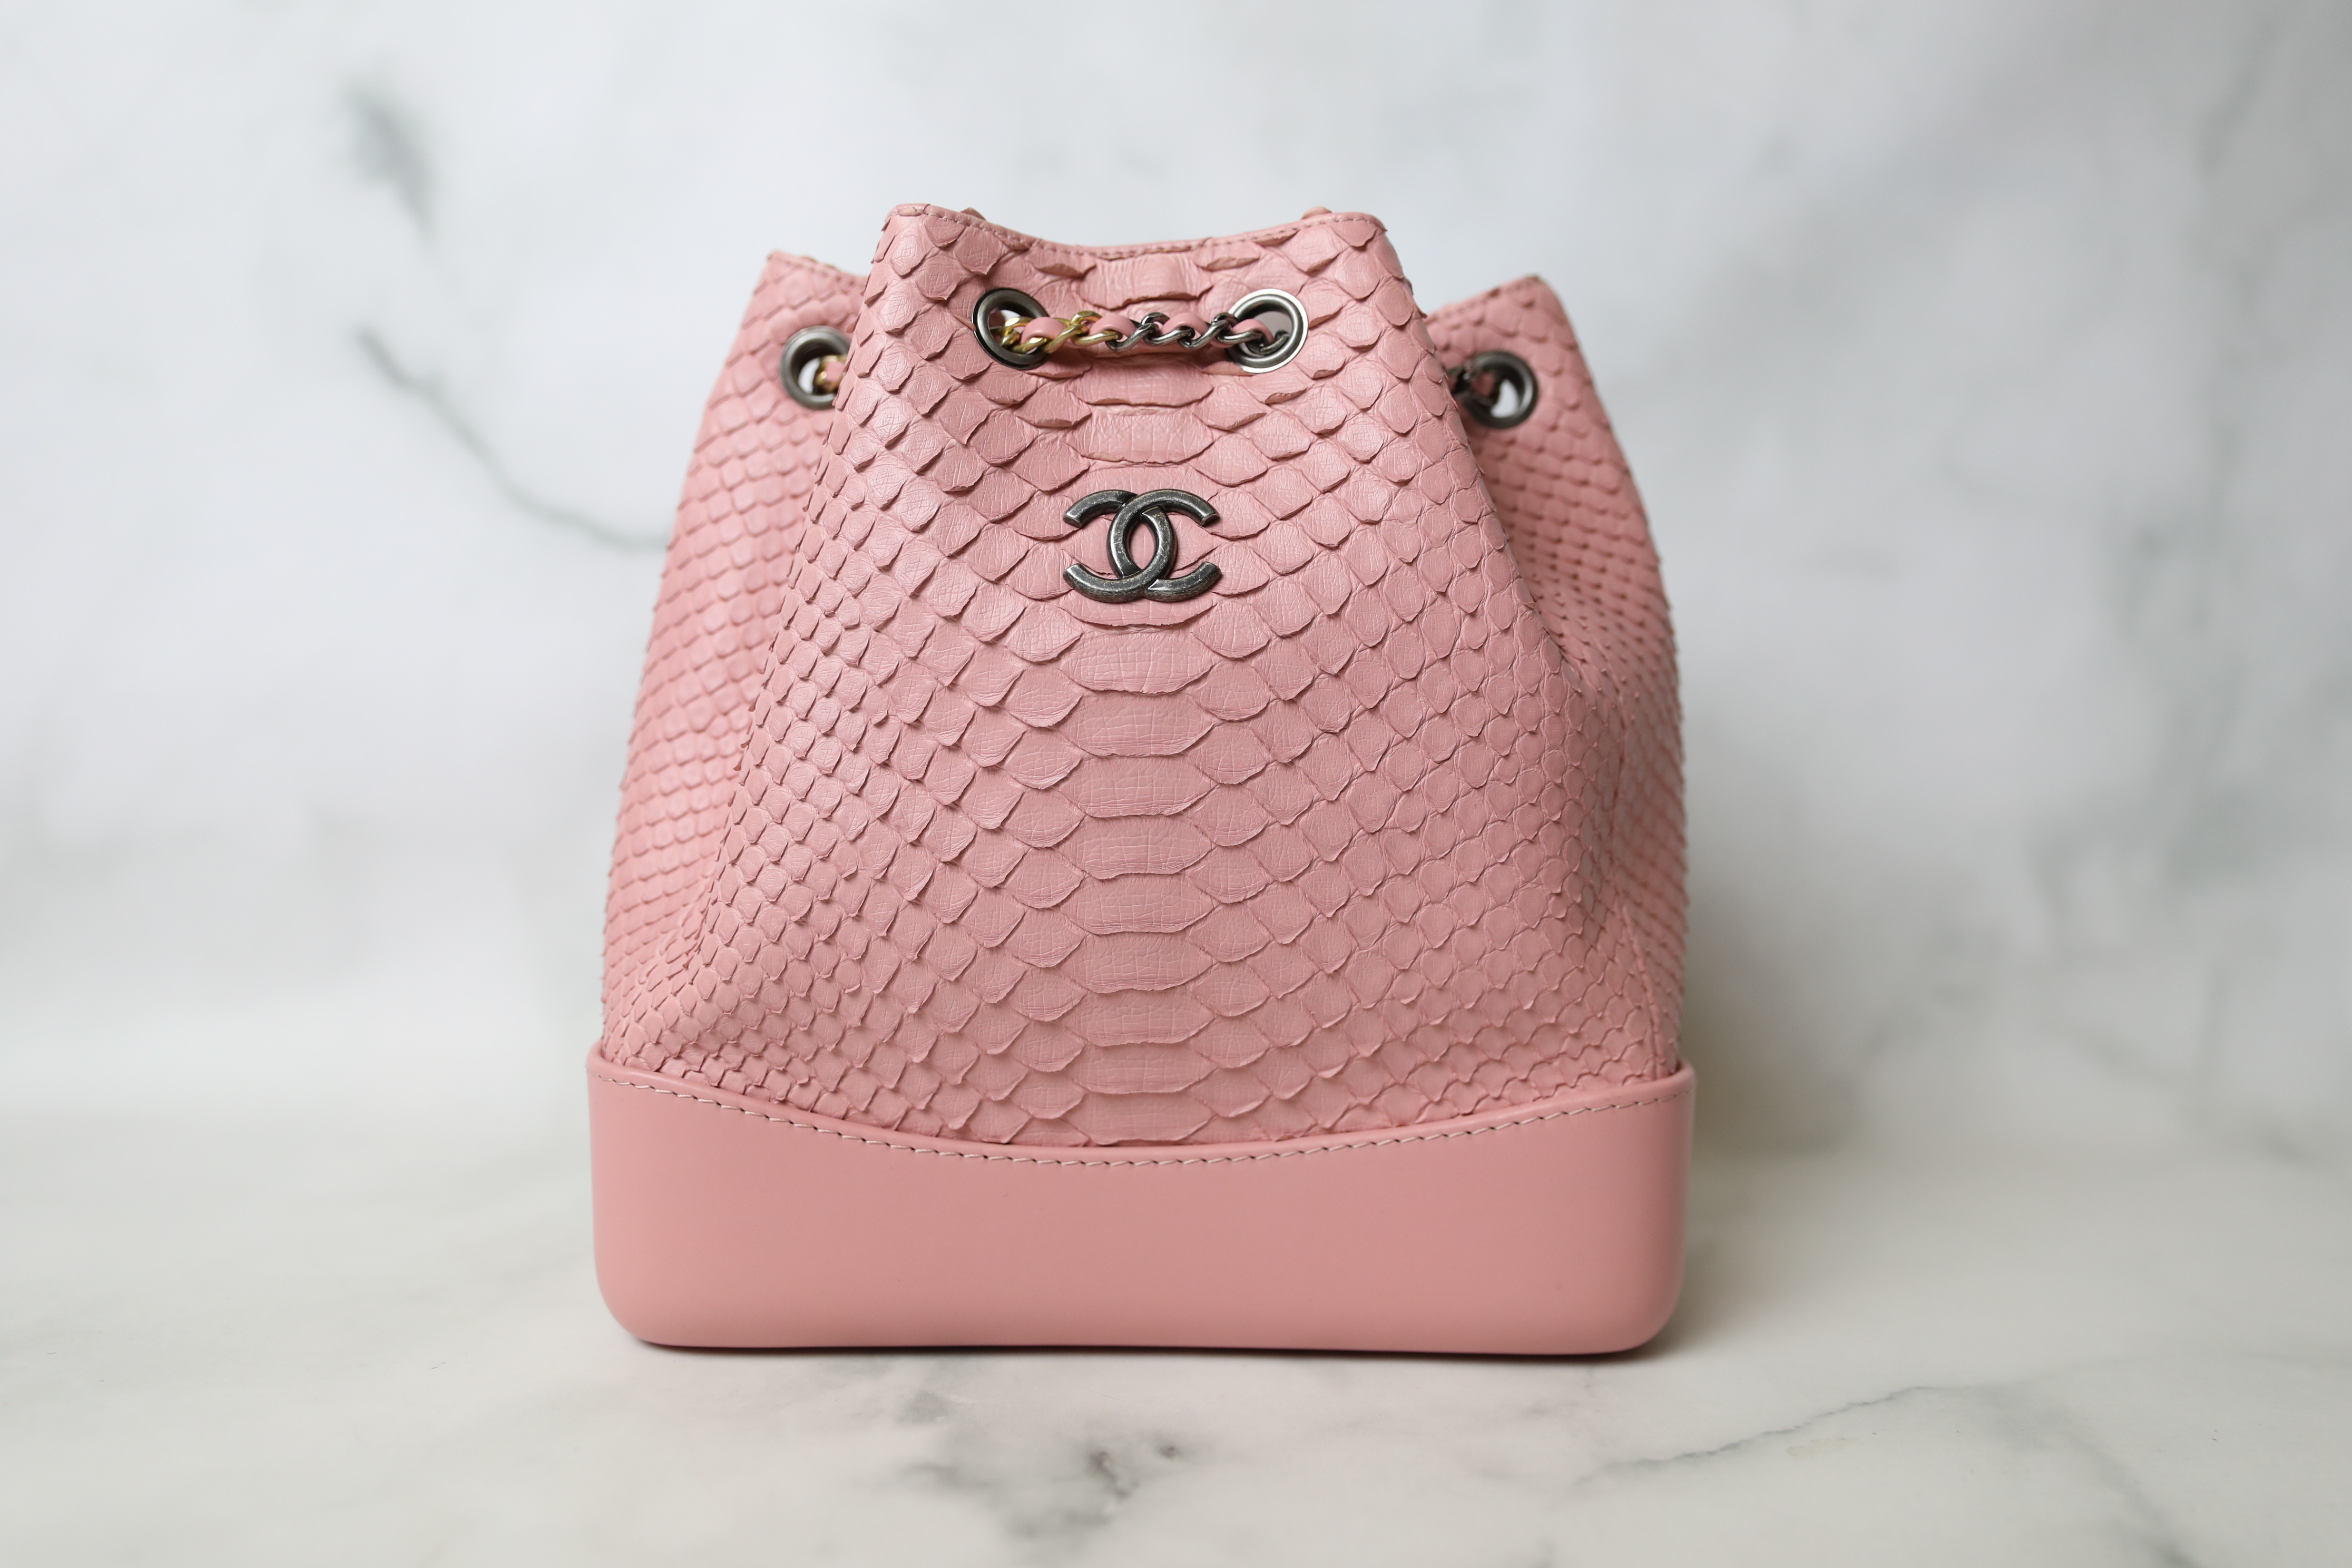 UNBOXING: Chanel Gabrielle Backpack - The PINK MACARON